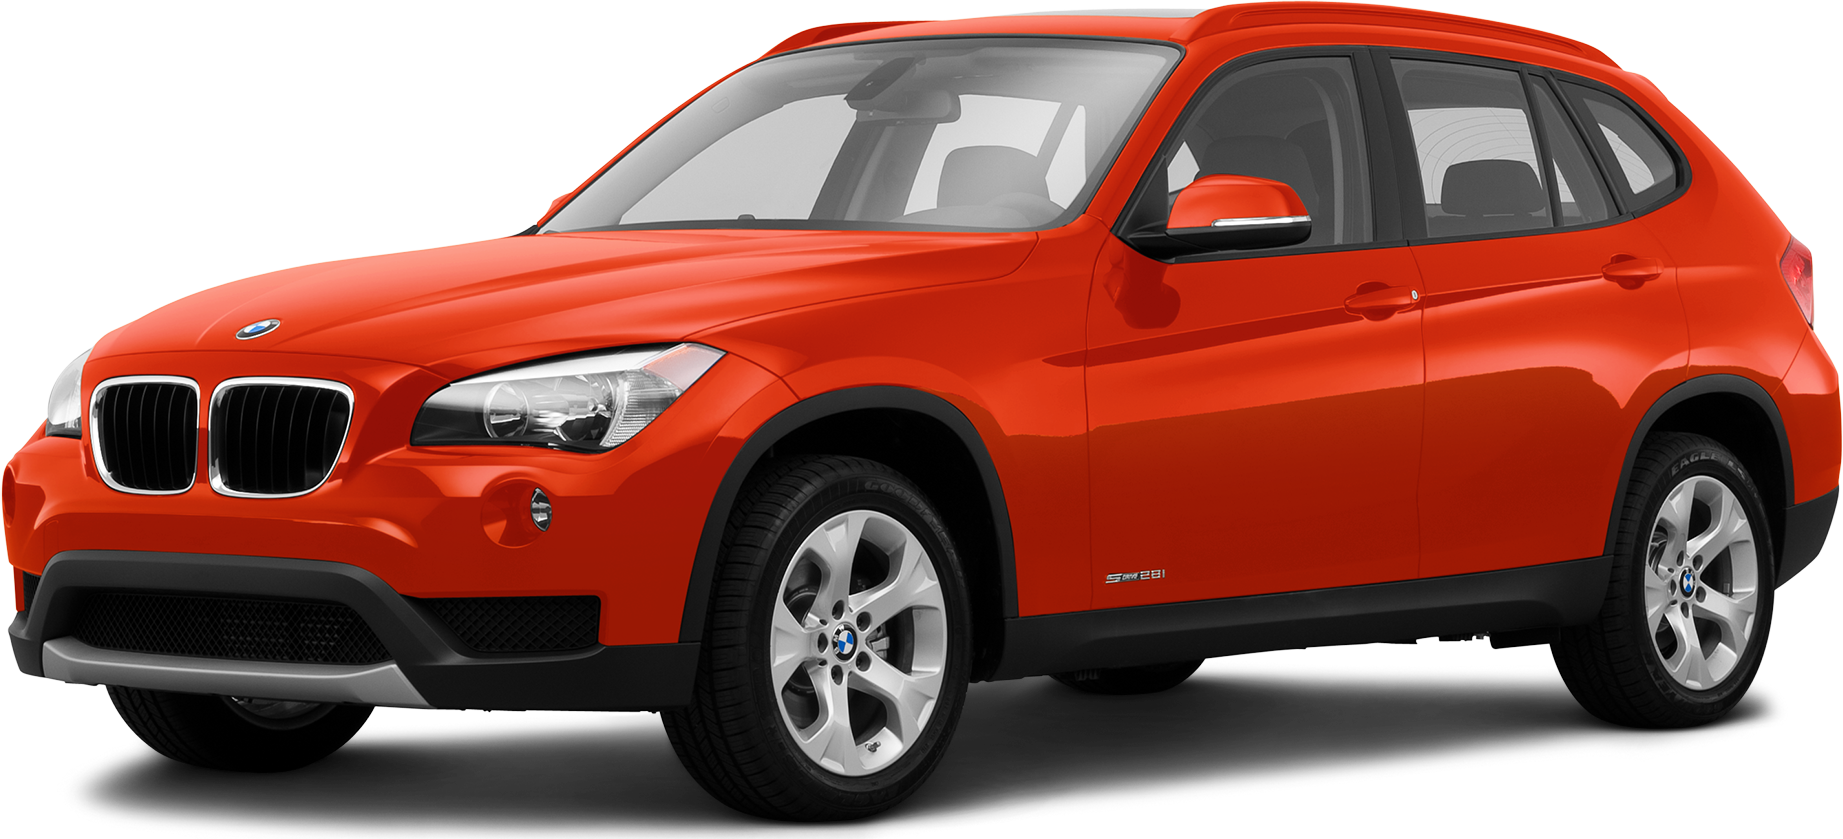 2014 BMW X1 Price, Value, Ratings & Reviews